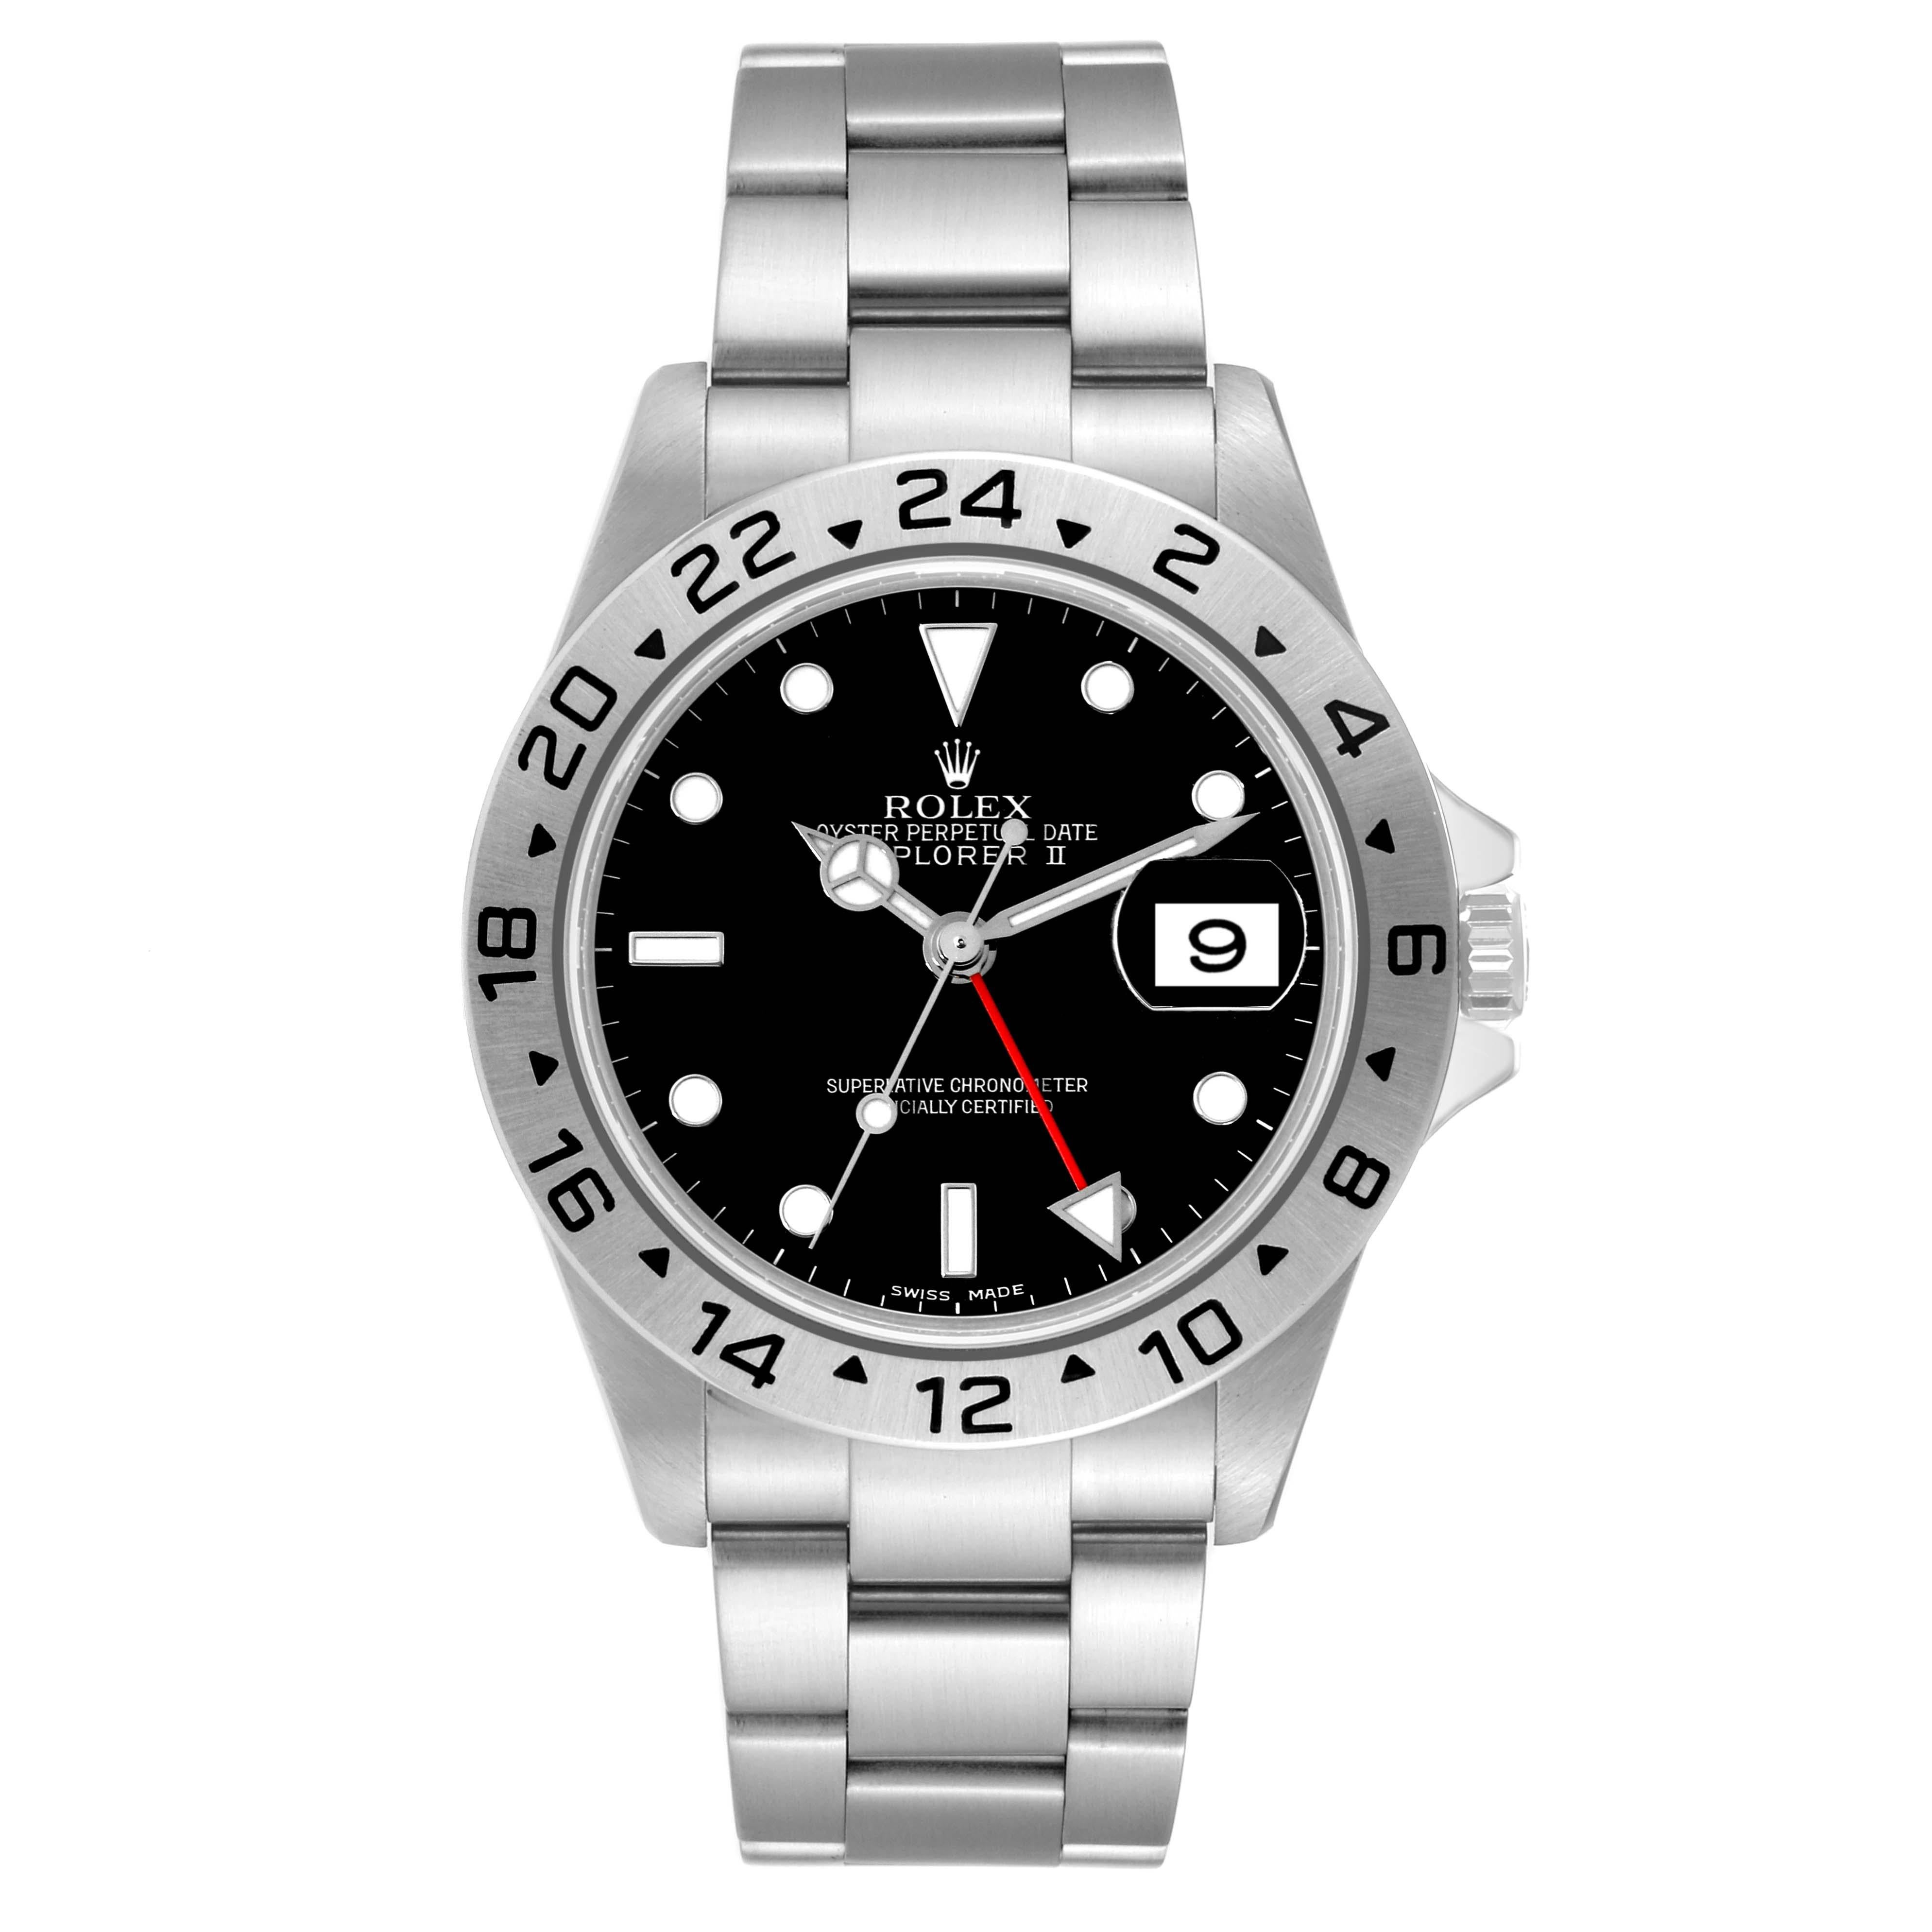 Rolex Explorer II Black Dial Steel Mens Watch 16570 Box Card. Officially certified chronometer automatic self-winding movement. Stainless steel case 40 mm in diameter. Rolex logo on the crown. Stainless steel bezel with 24-hour scale. Scratch